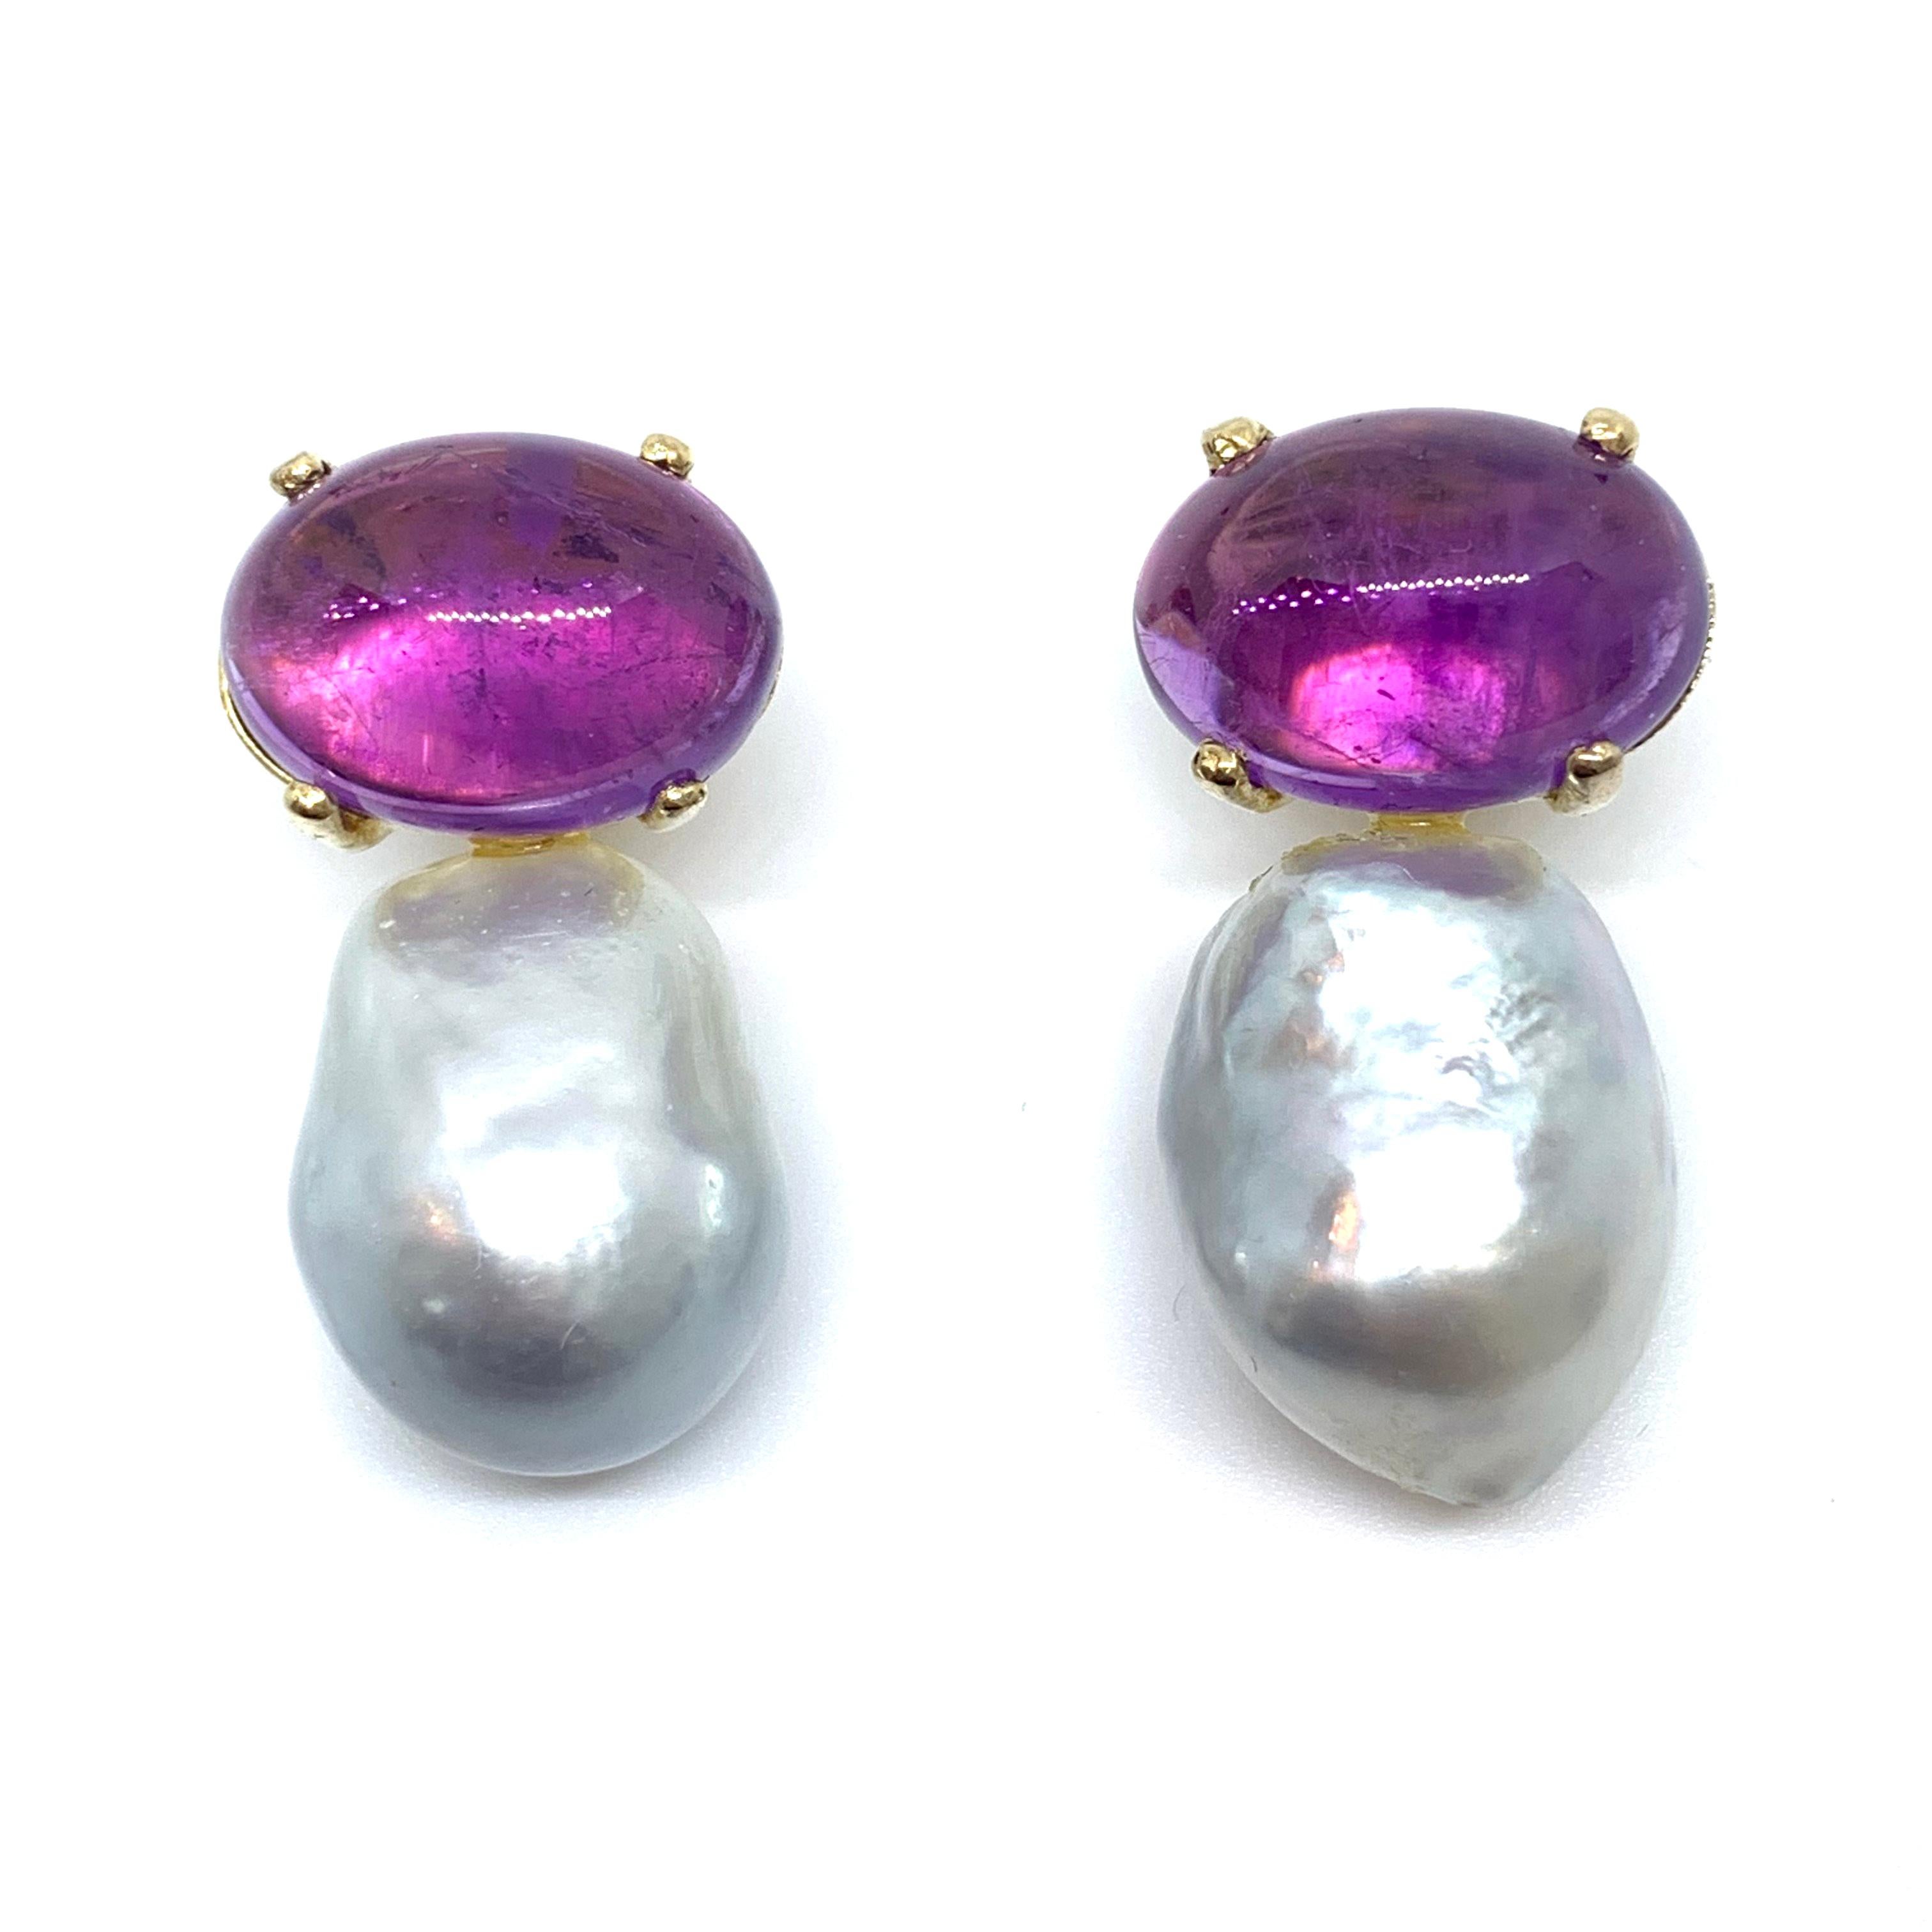 These stunning pair of earrings feature a pair of genuine cabochon-cut oval Brazilian amethyst and lustrous Australian south sea baroque pearls, handset in 18k yellow gold vermeil over sterling silver. The lustrous south sea pearls measure 13mm